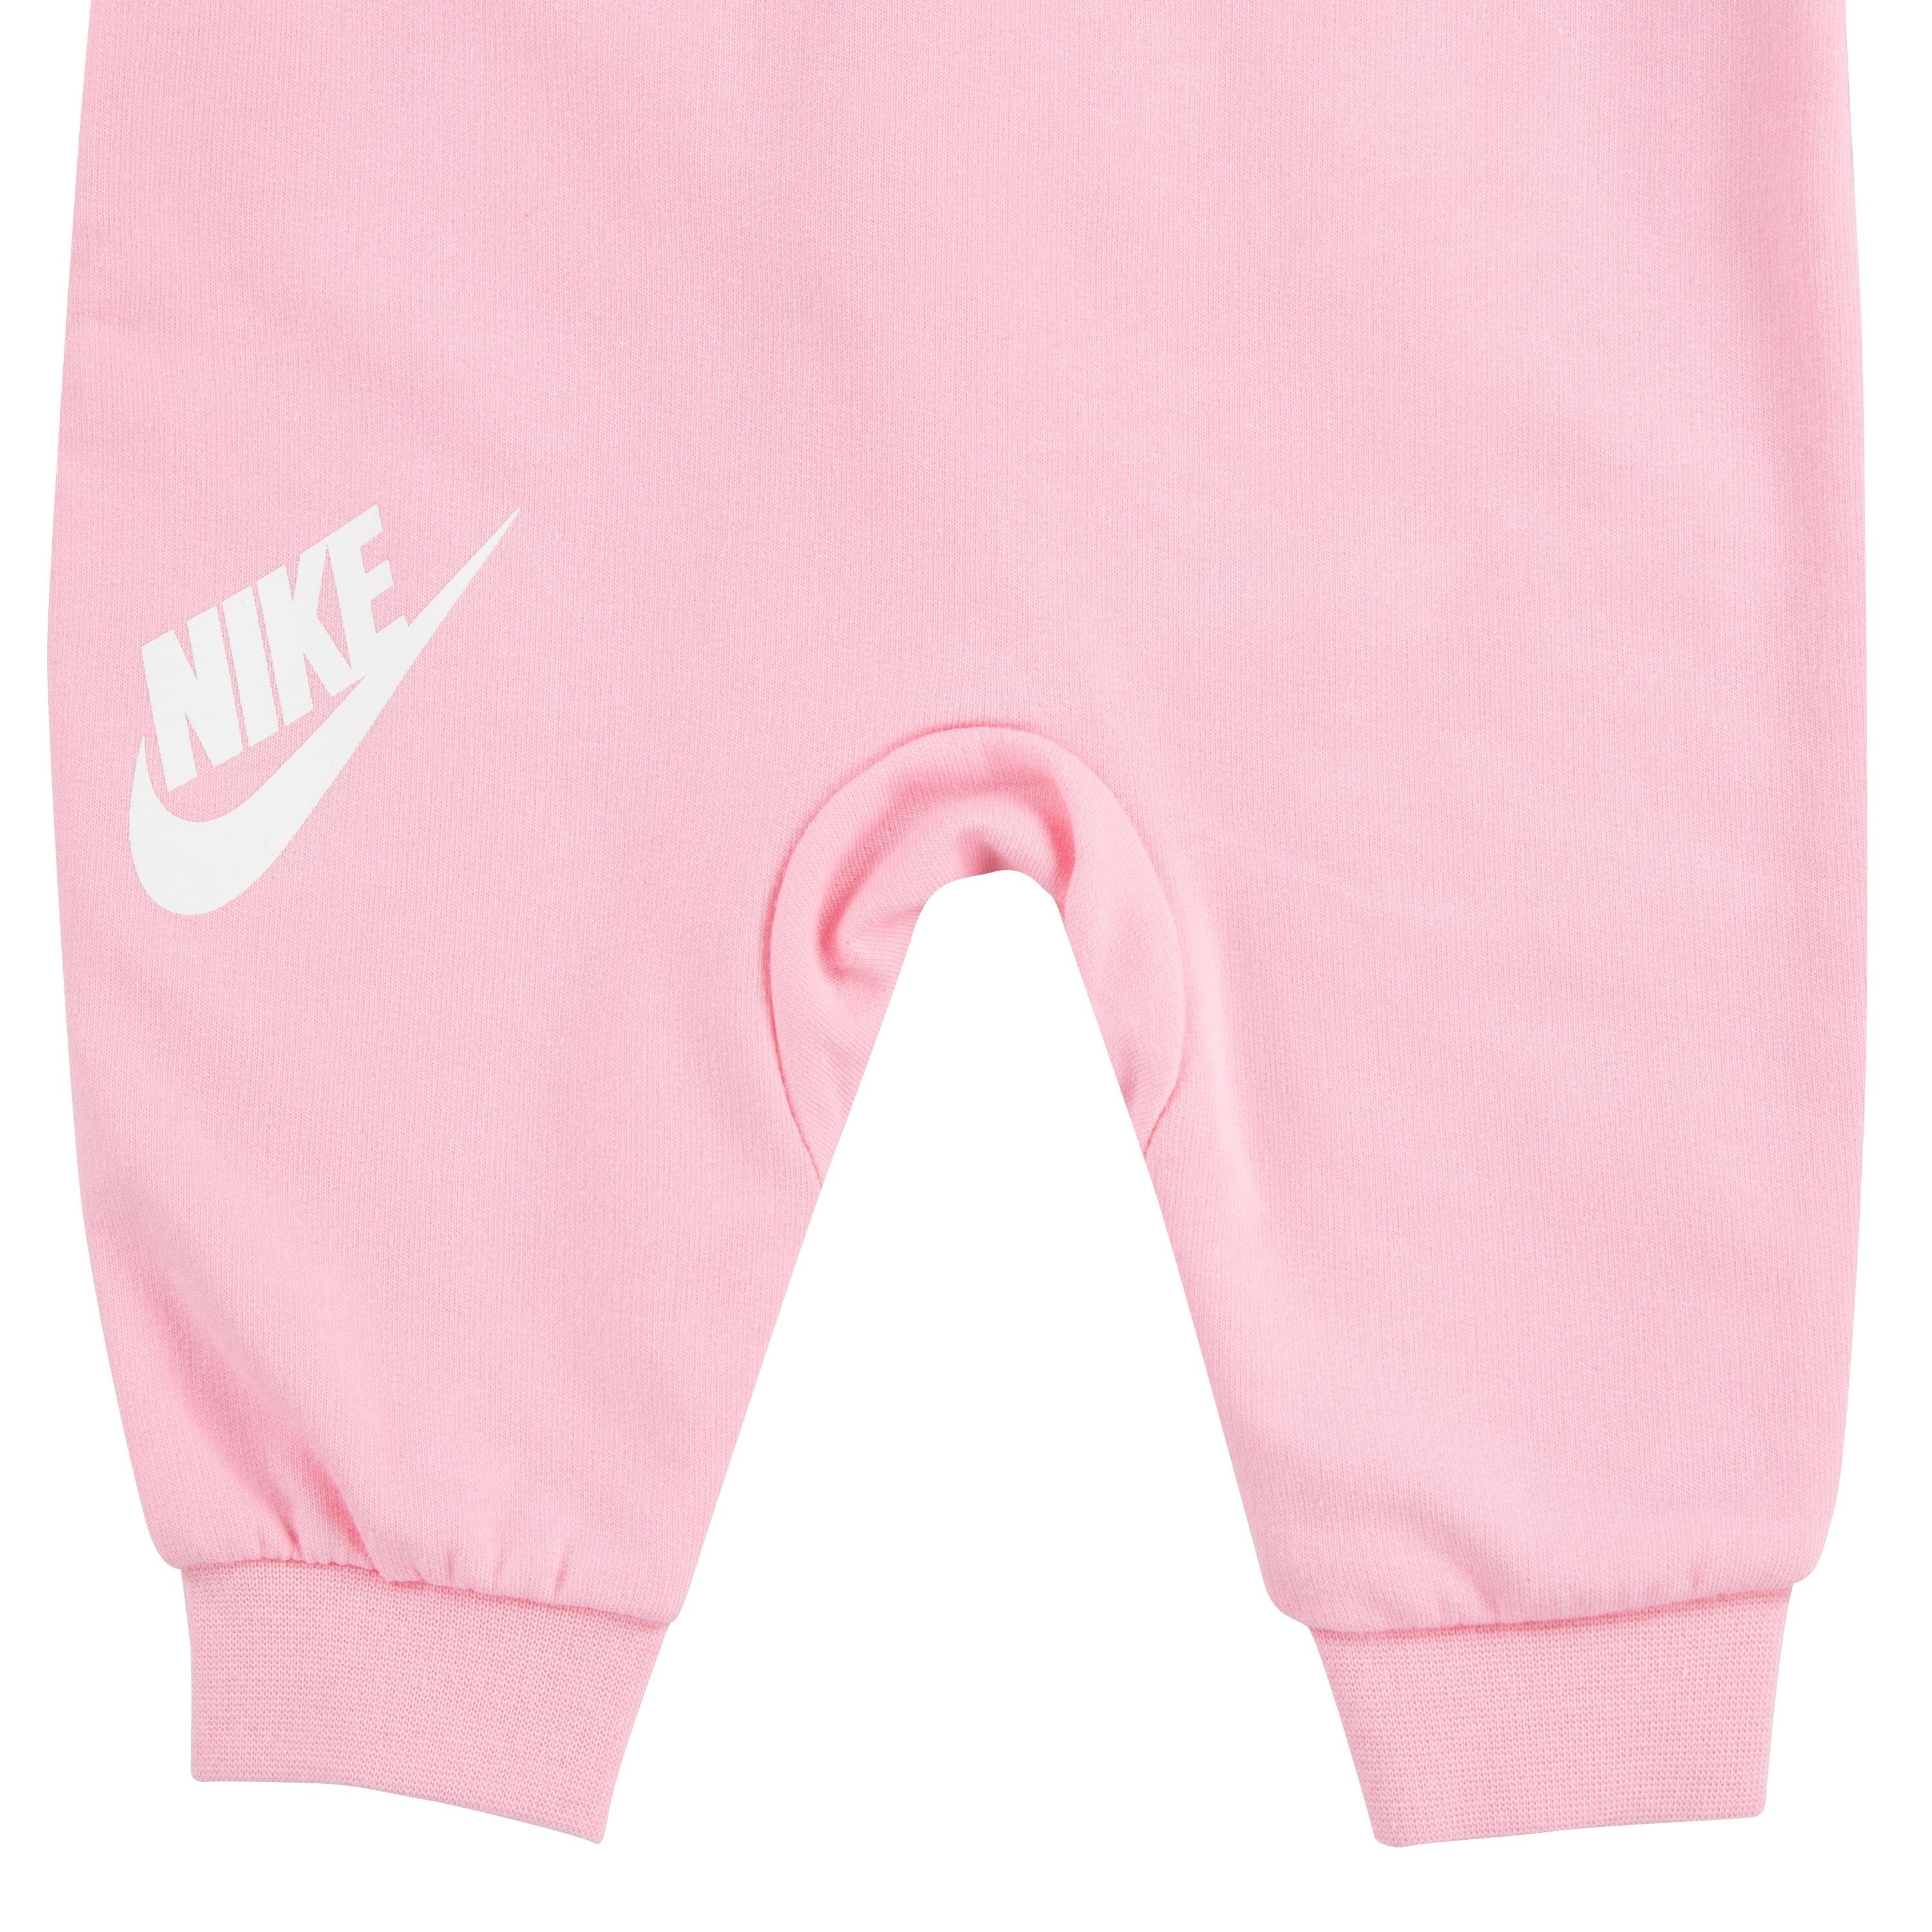 ALL rosa-weiß Nike PLAY Sportswear Strampler NKN COVERALL DAY